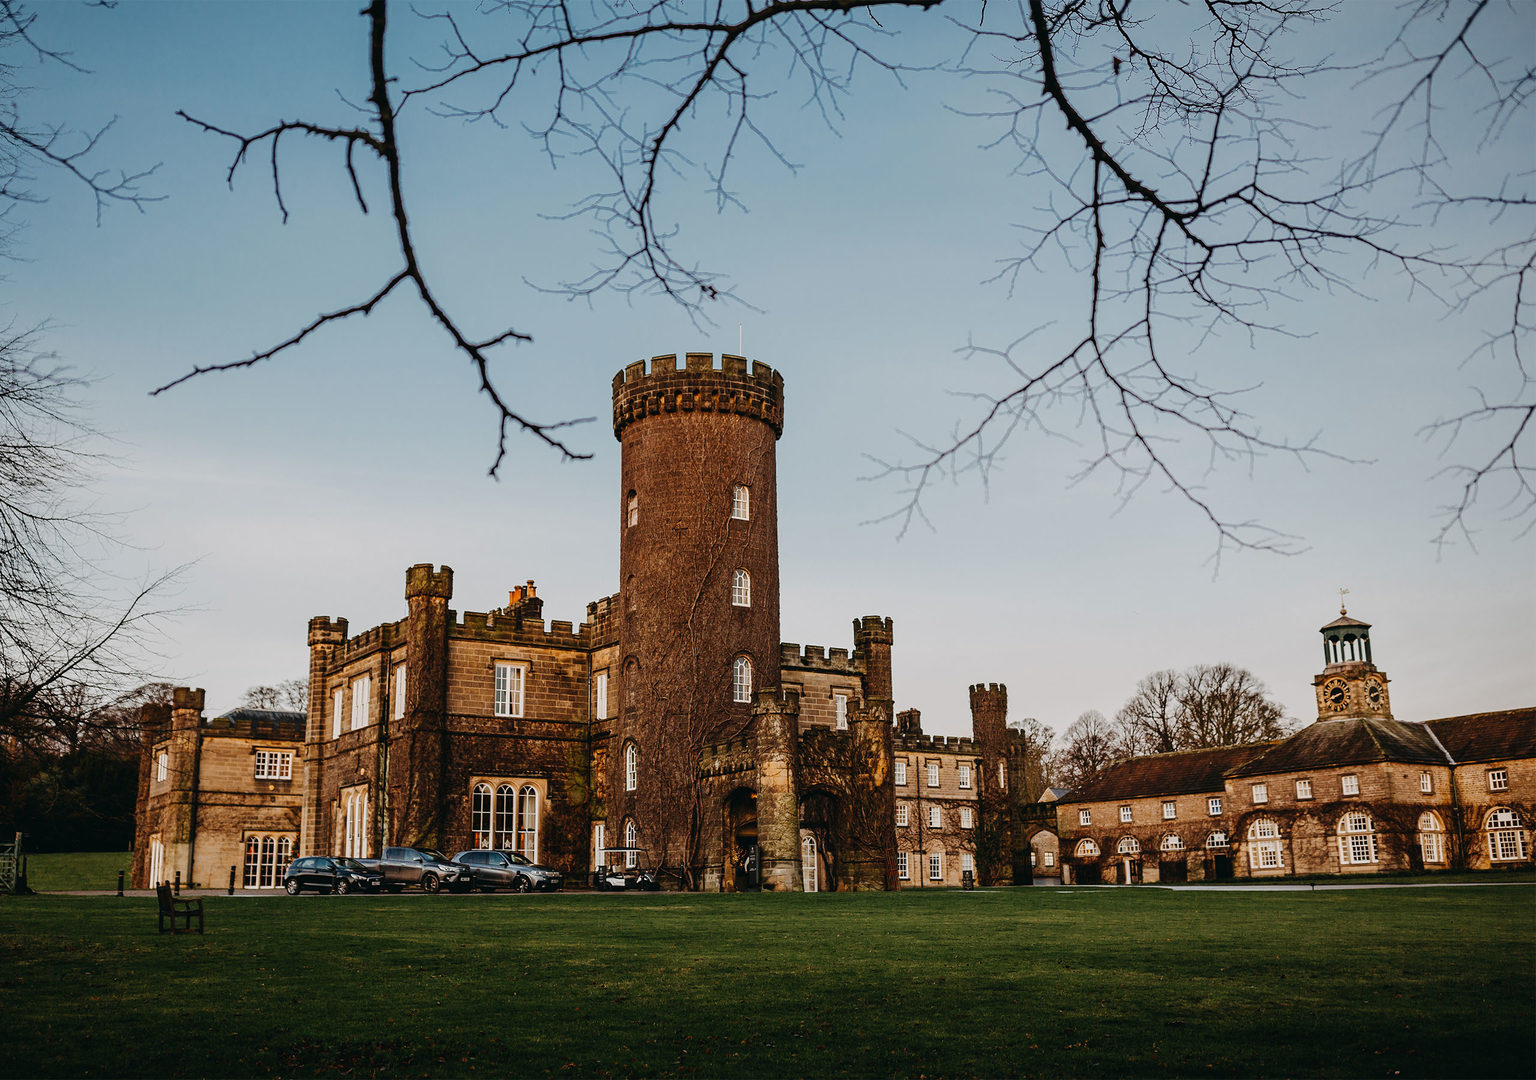 The castle turret of Swinton Park Hotel during the winter